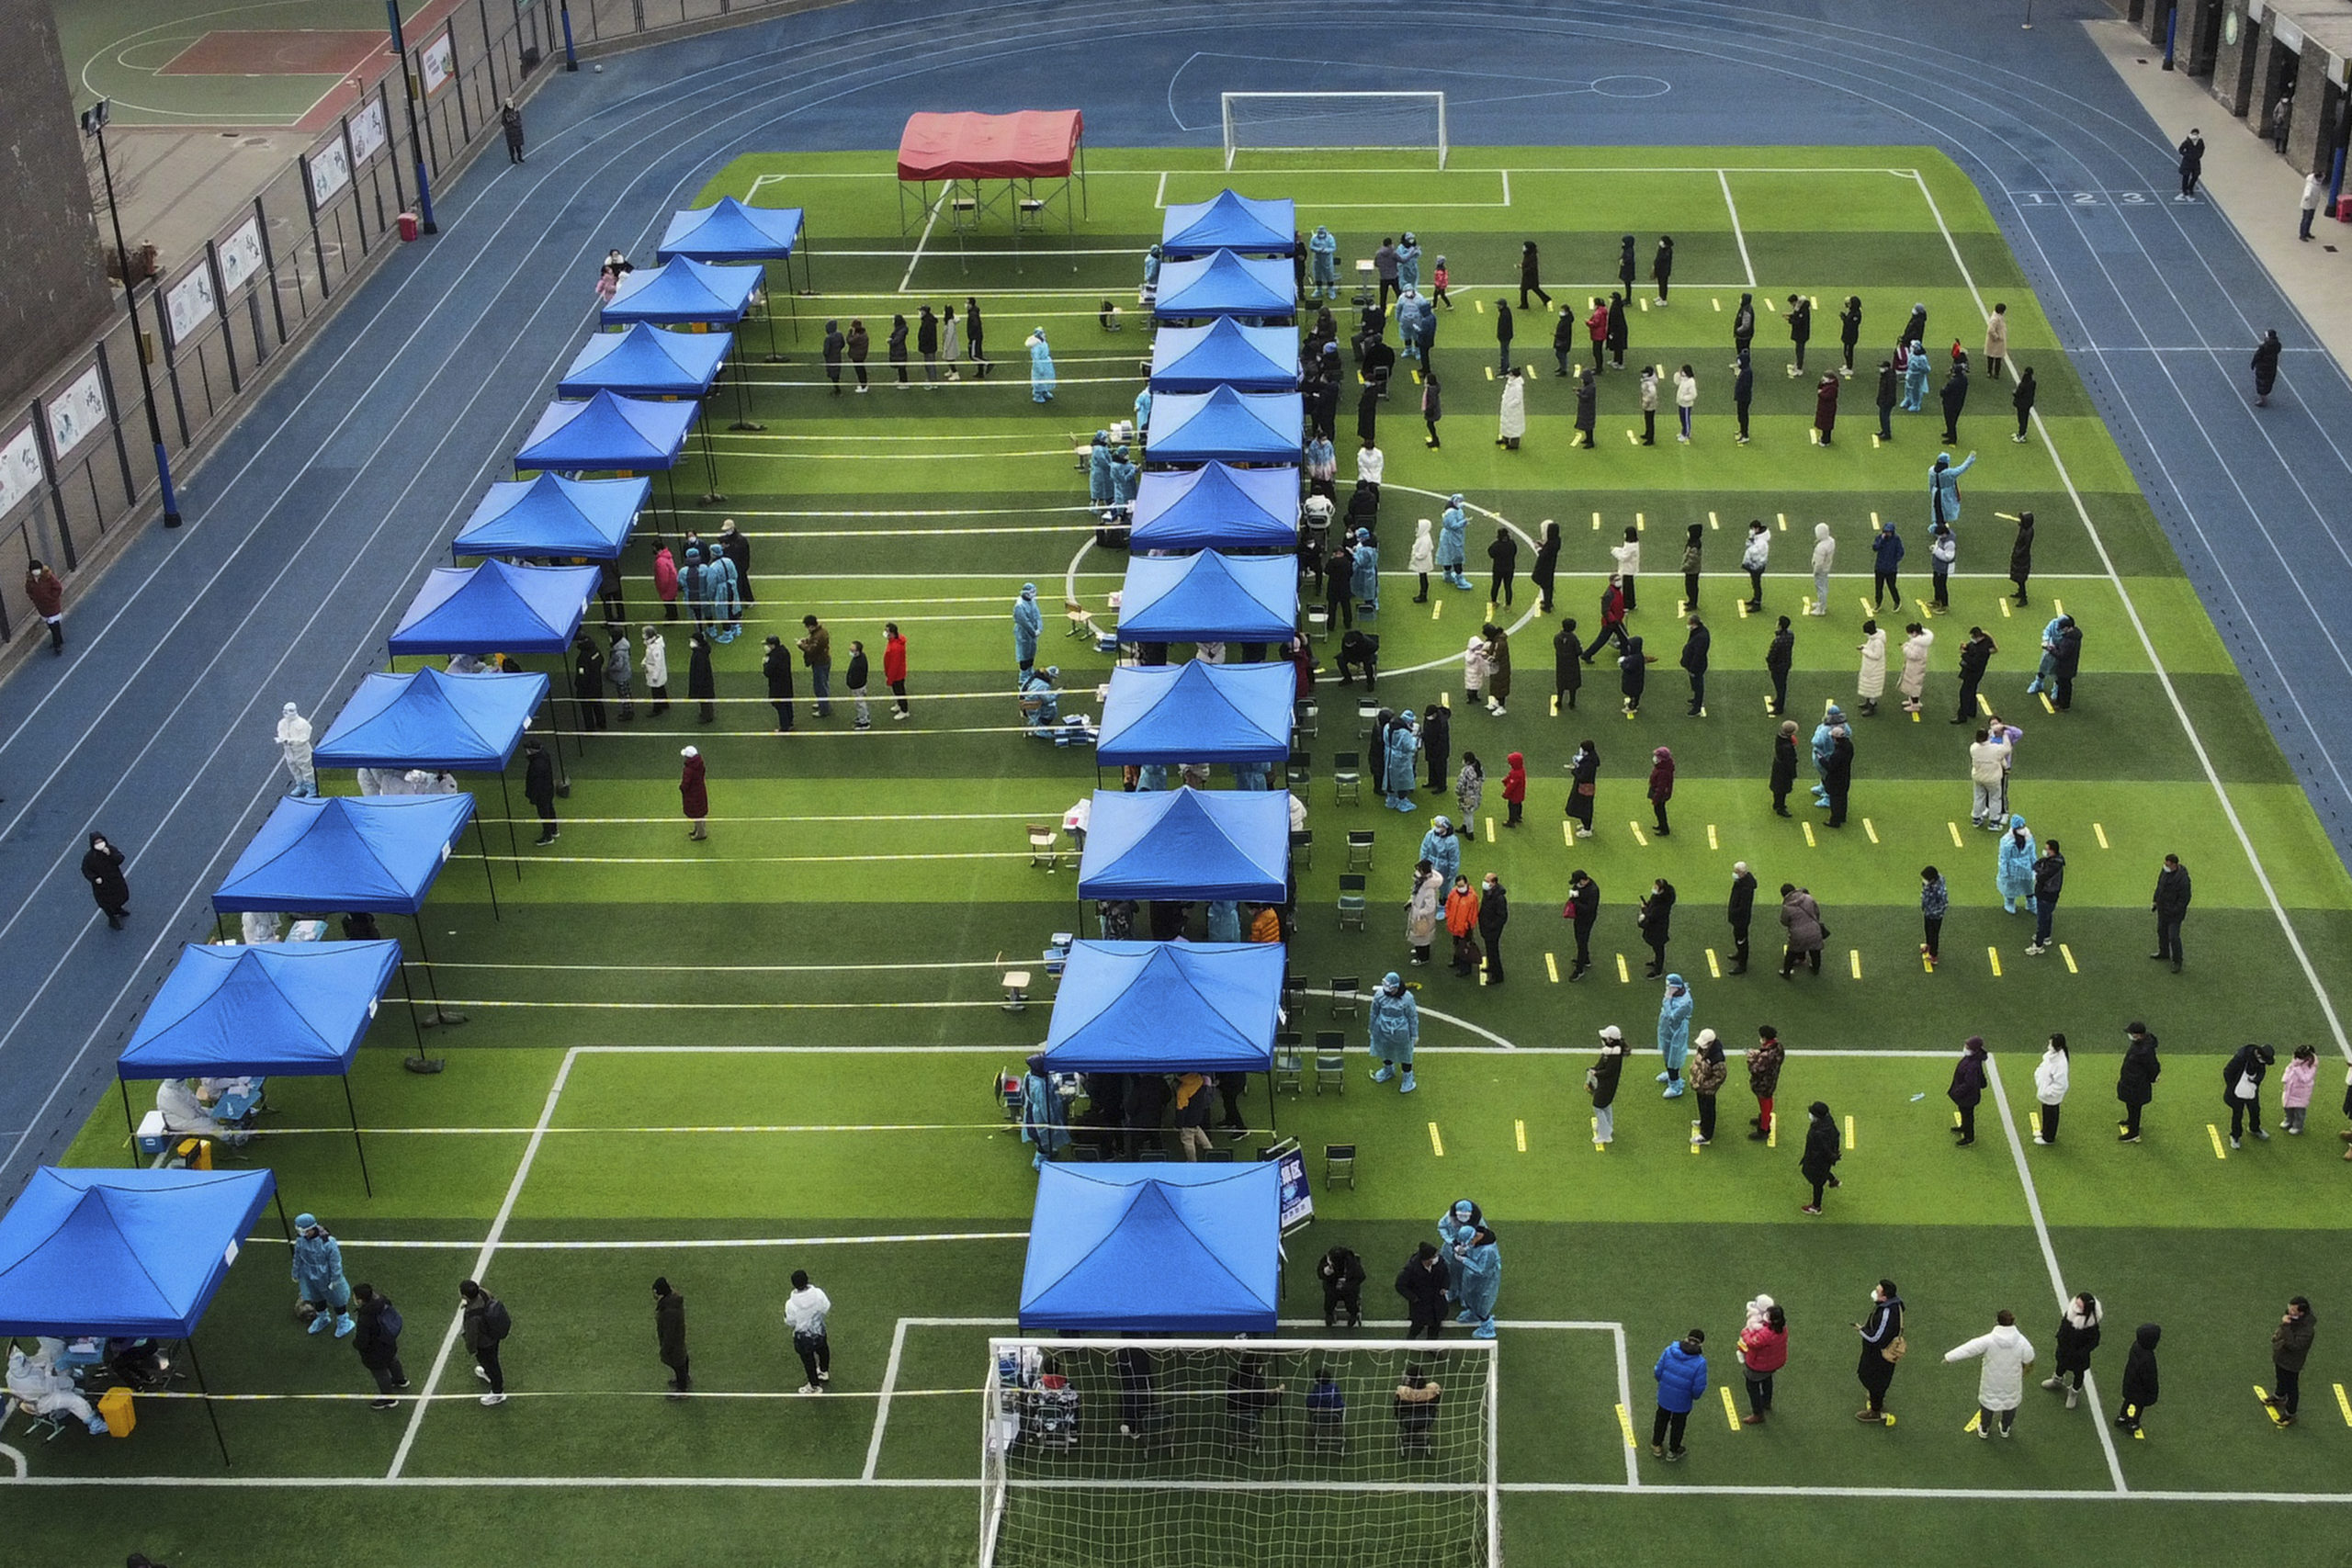 Residents line up on a football field for a COVID test during a mass testing in north China's Tianjin municipality on Sunday.